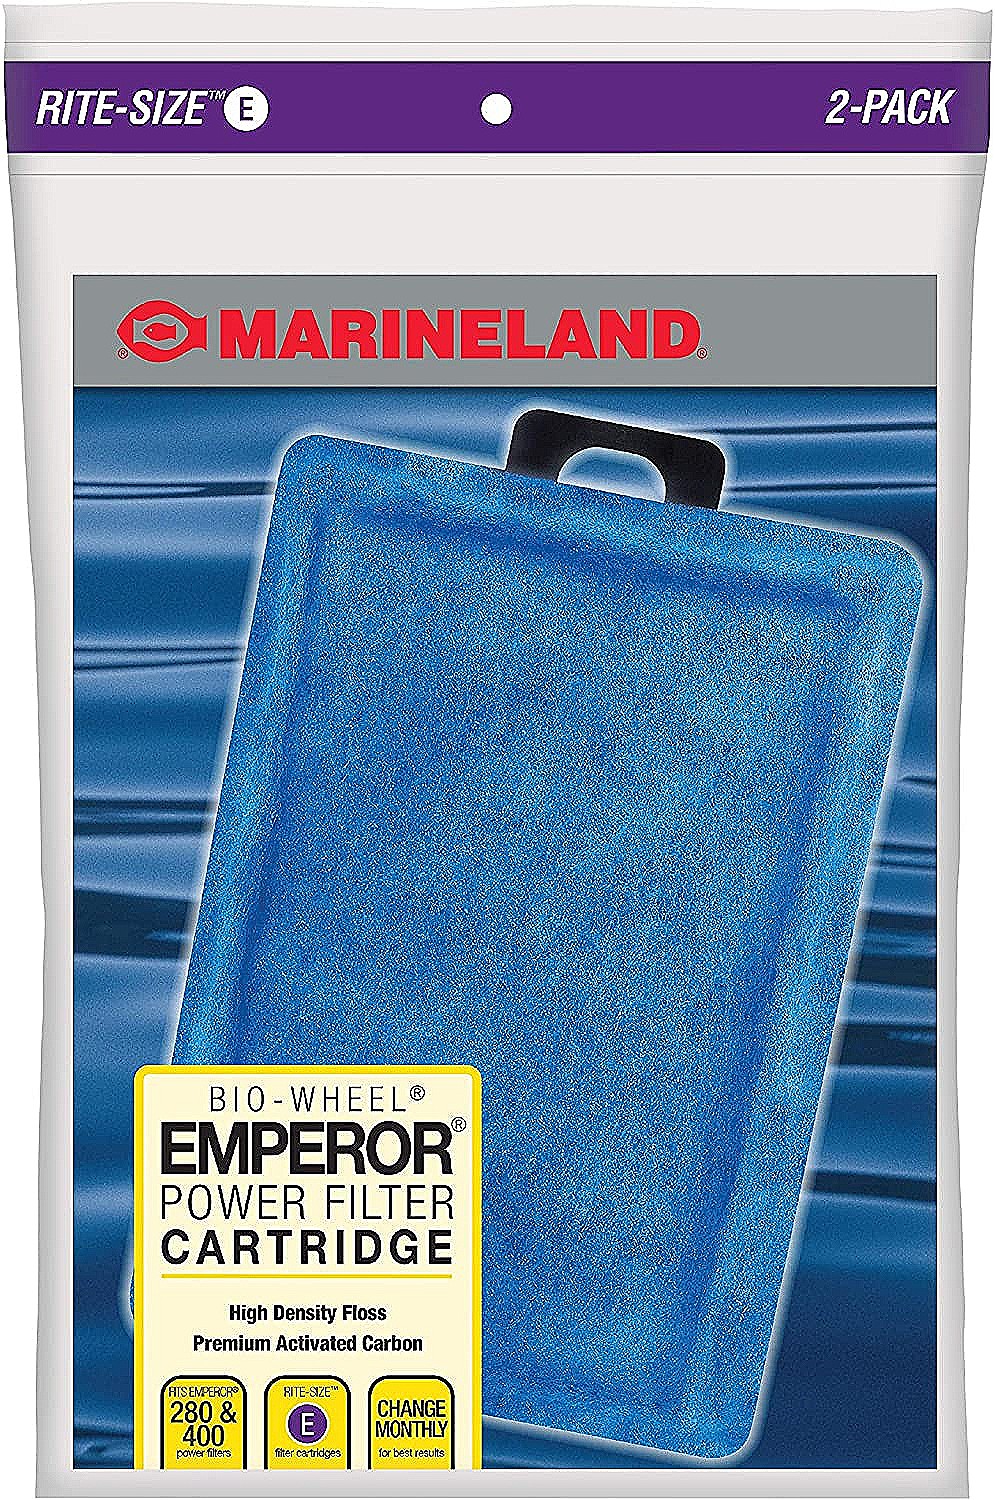 Marineland Rite-Size E Filter Cartridge Refills Fits Emperor 280 400 Filters New 